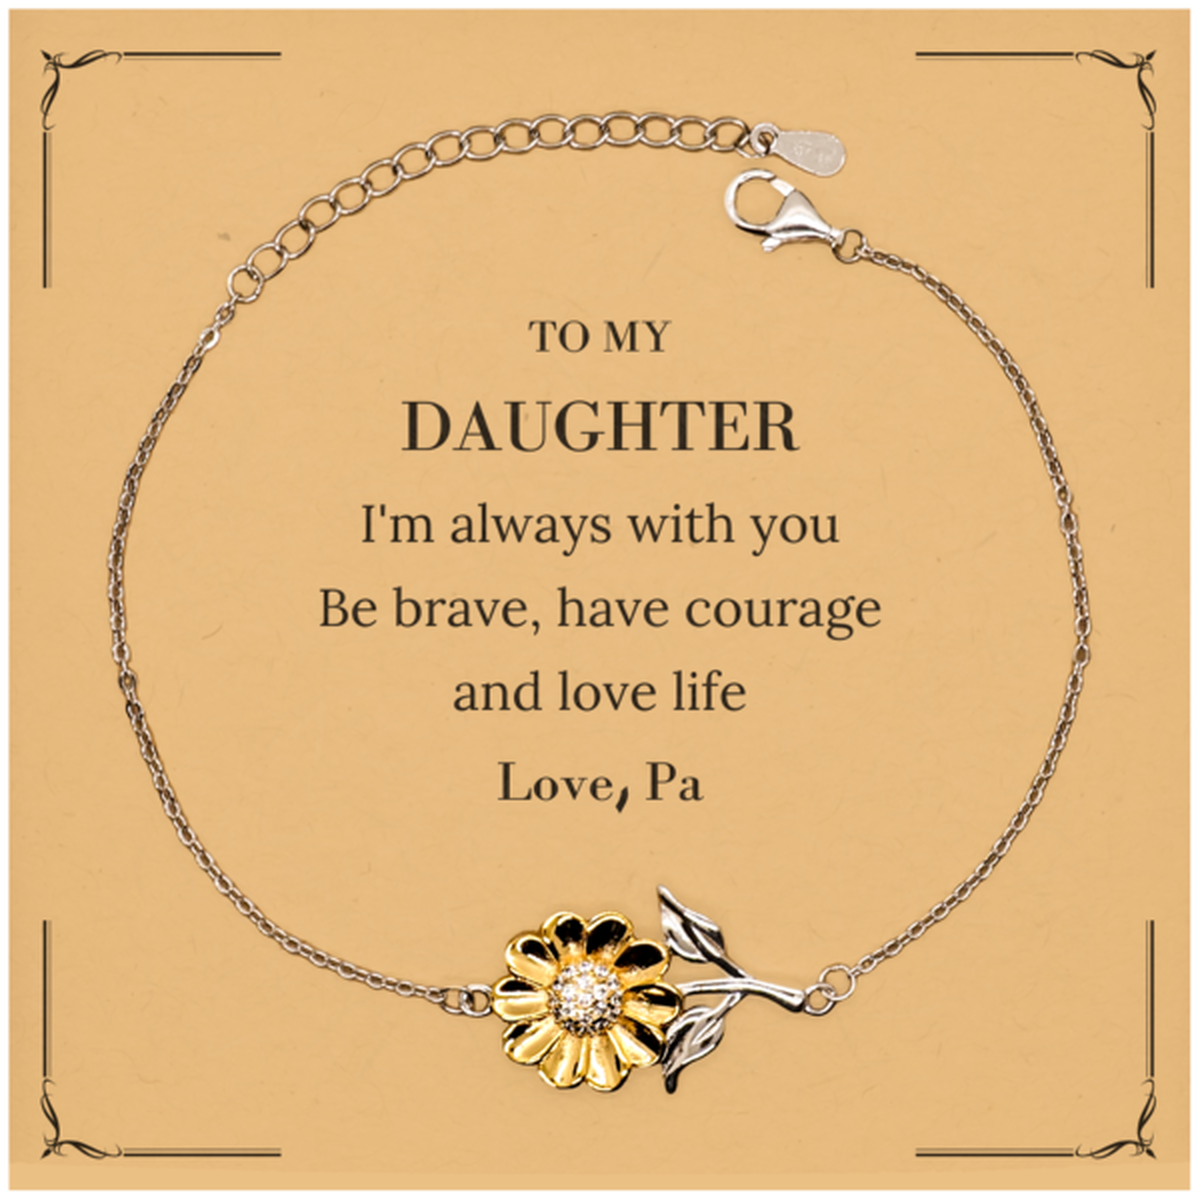 To My Daughter Gifts from Pa, Unique Sunflower Bracelet Inspirational Christmas Birthday Graduation Gifts for Daughter I'm always with you. Be brave, have courage and love life. Love, Pa